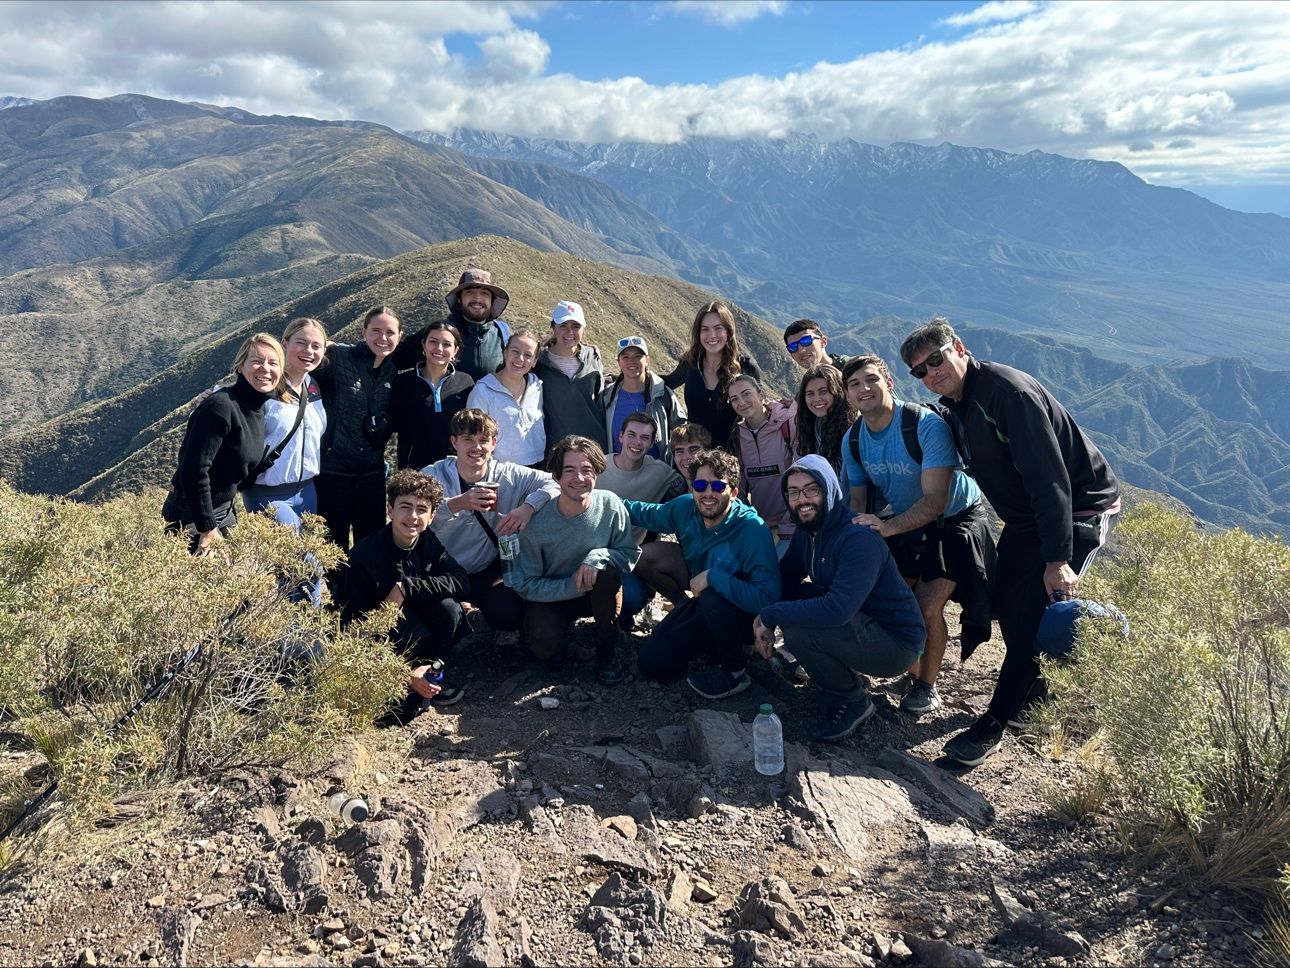 Belmont group pose on top of mountain in Mendoza, Argentina